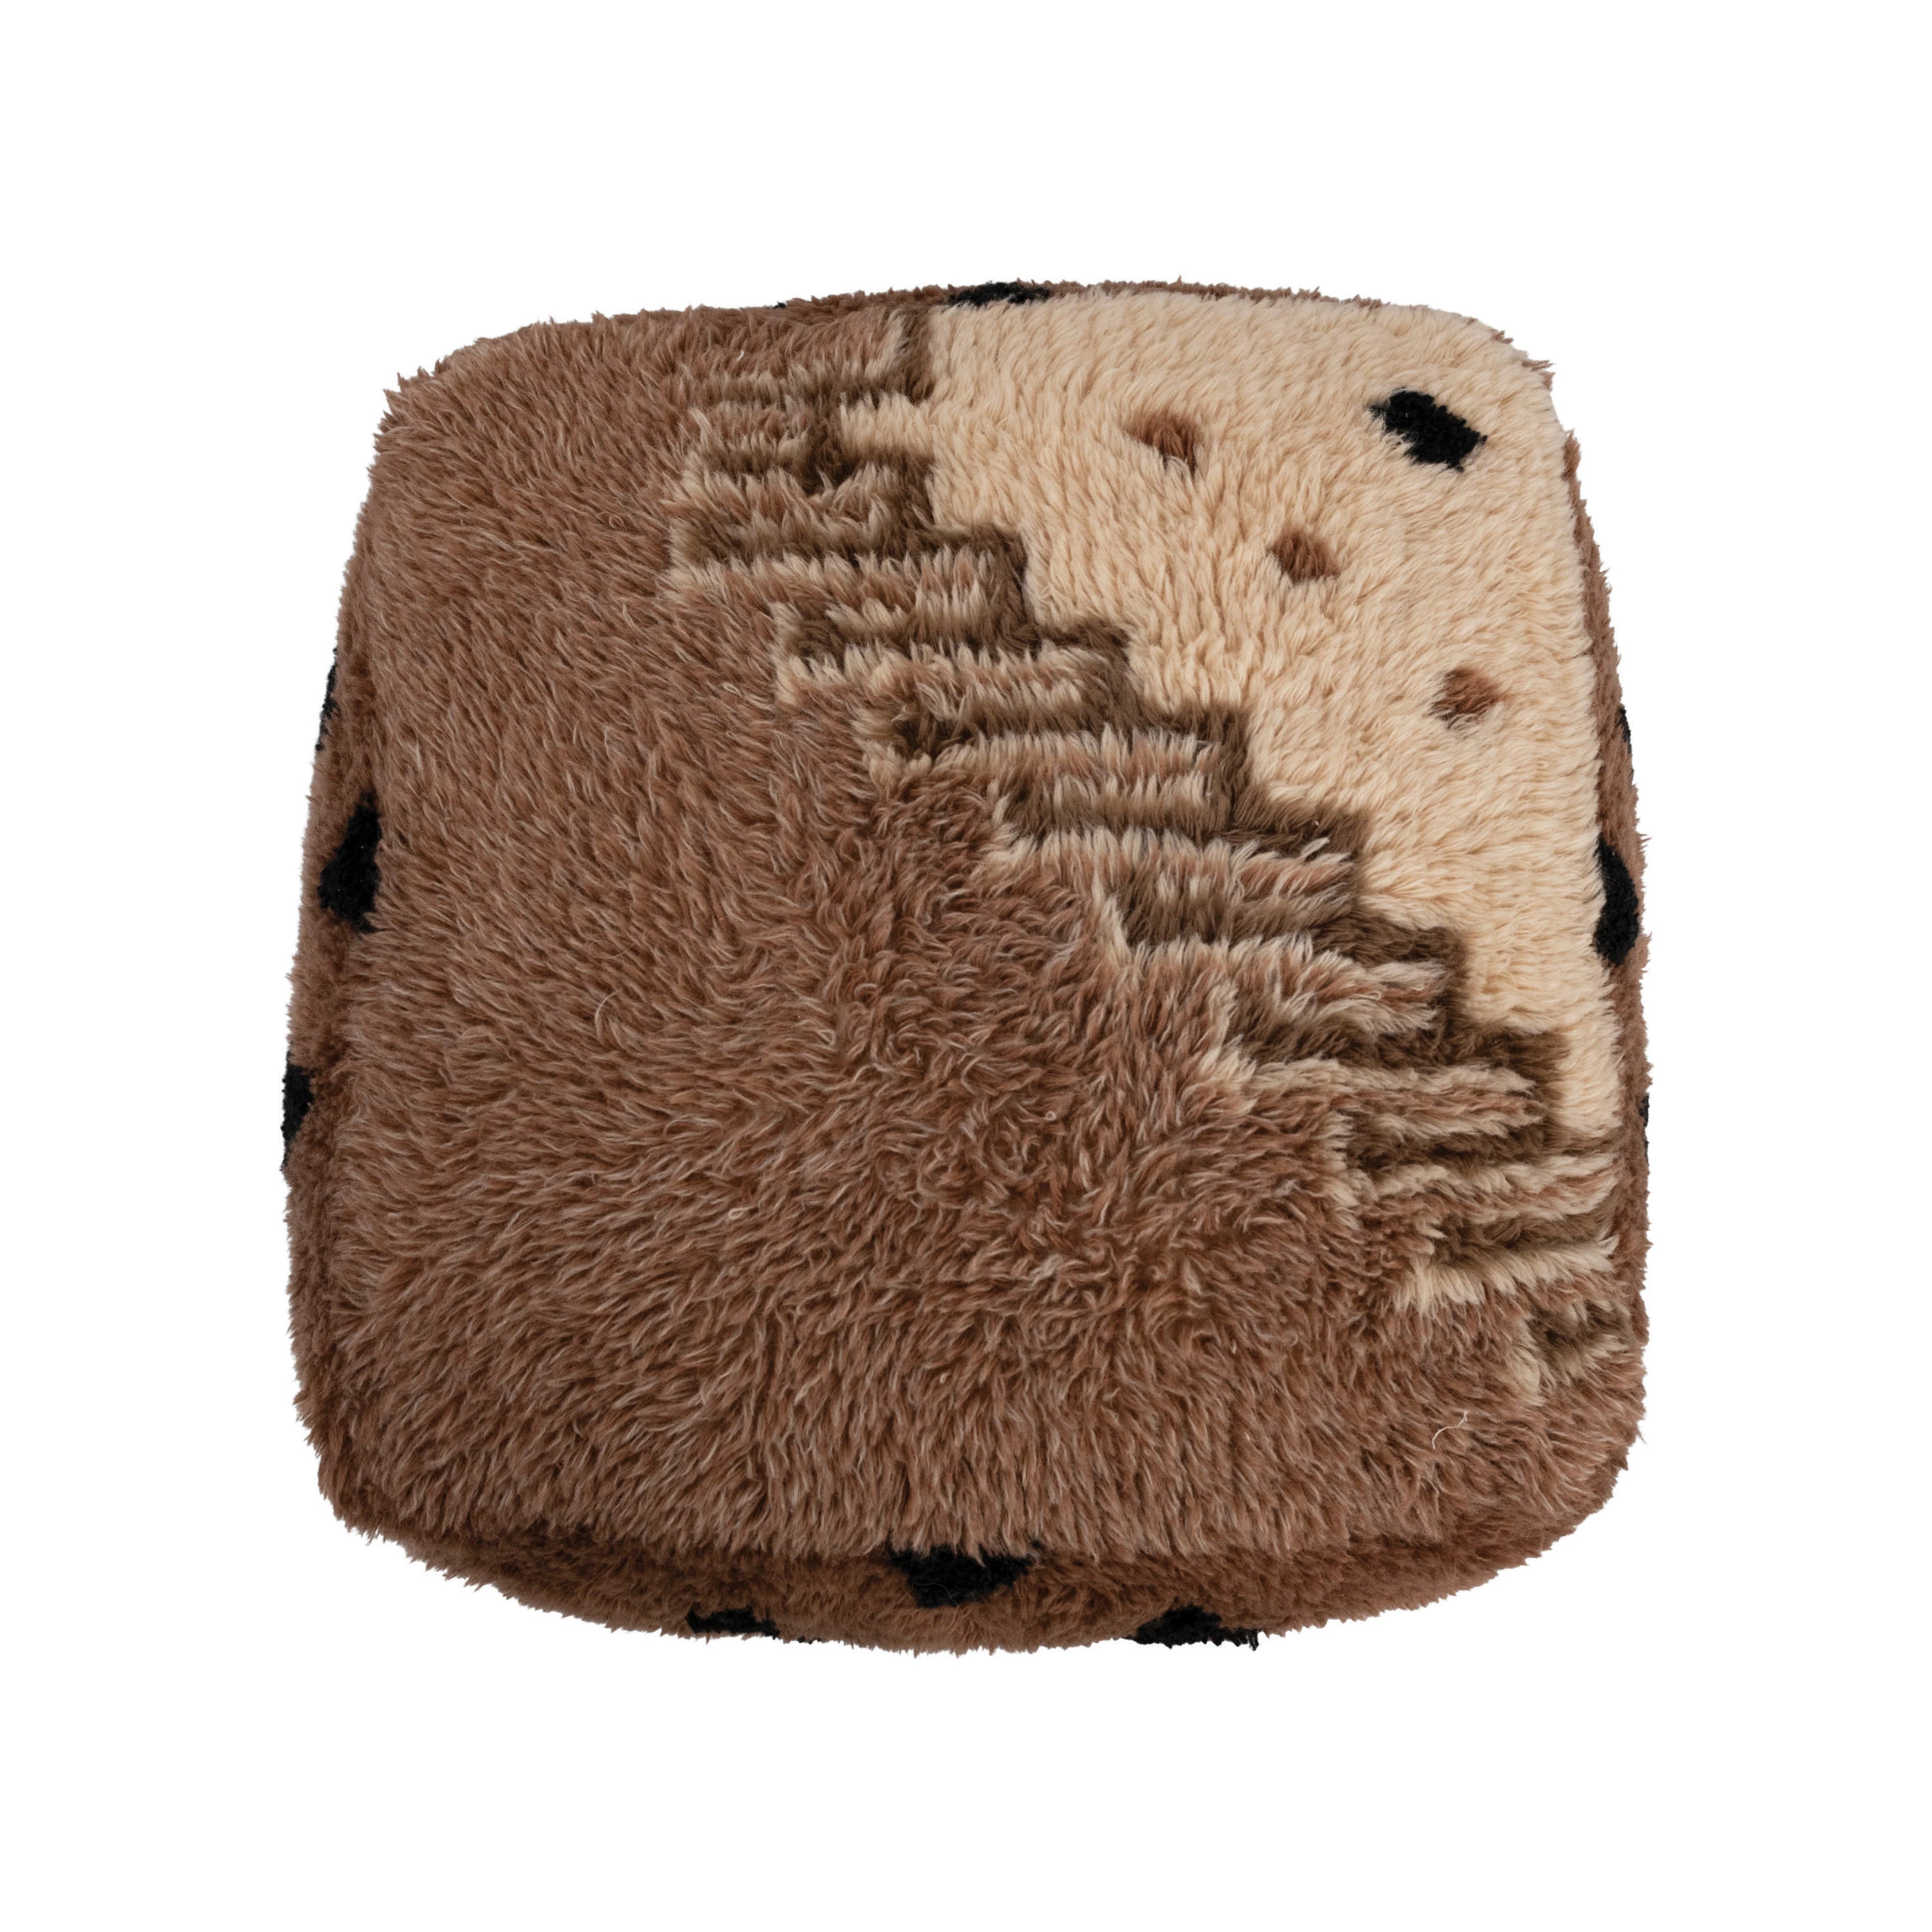 New Zealand Wool Tufted Pouf